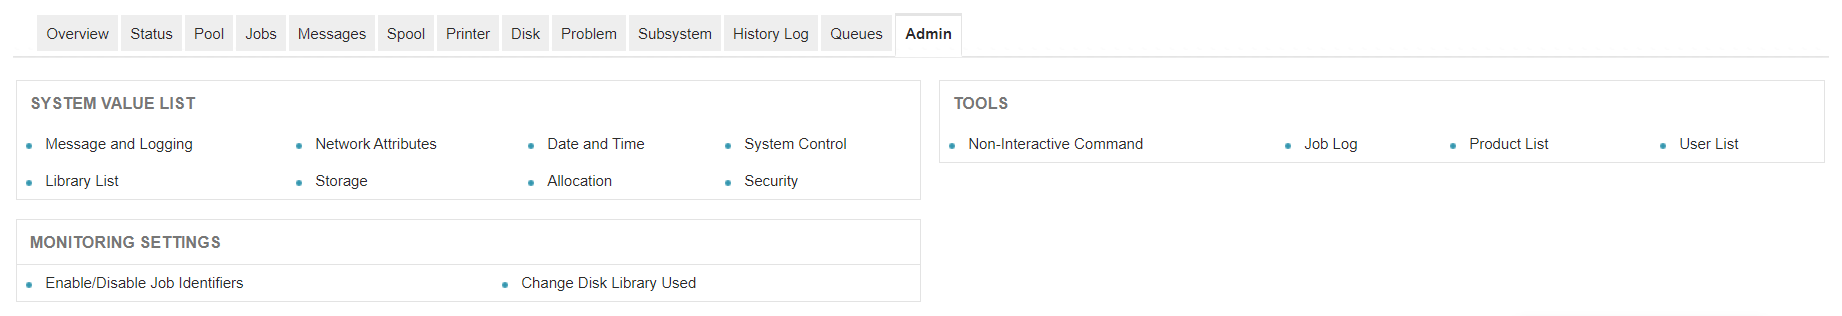 IBM iSeries Monitoring Tool - ManageEngine Applications Manager